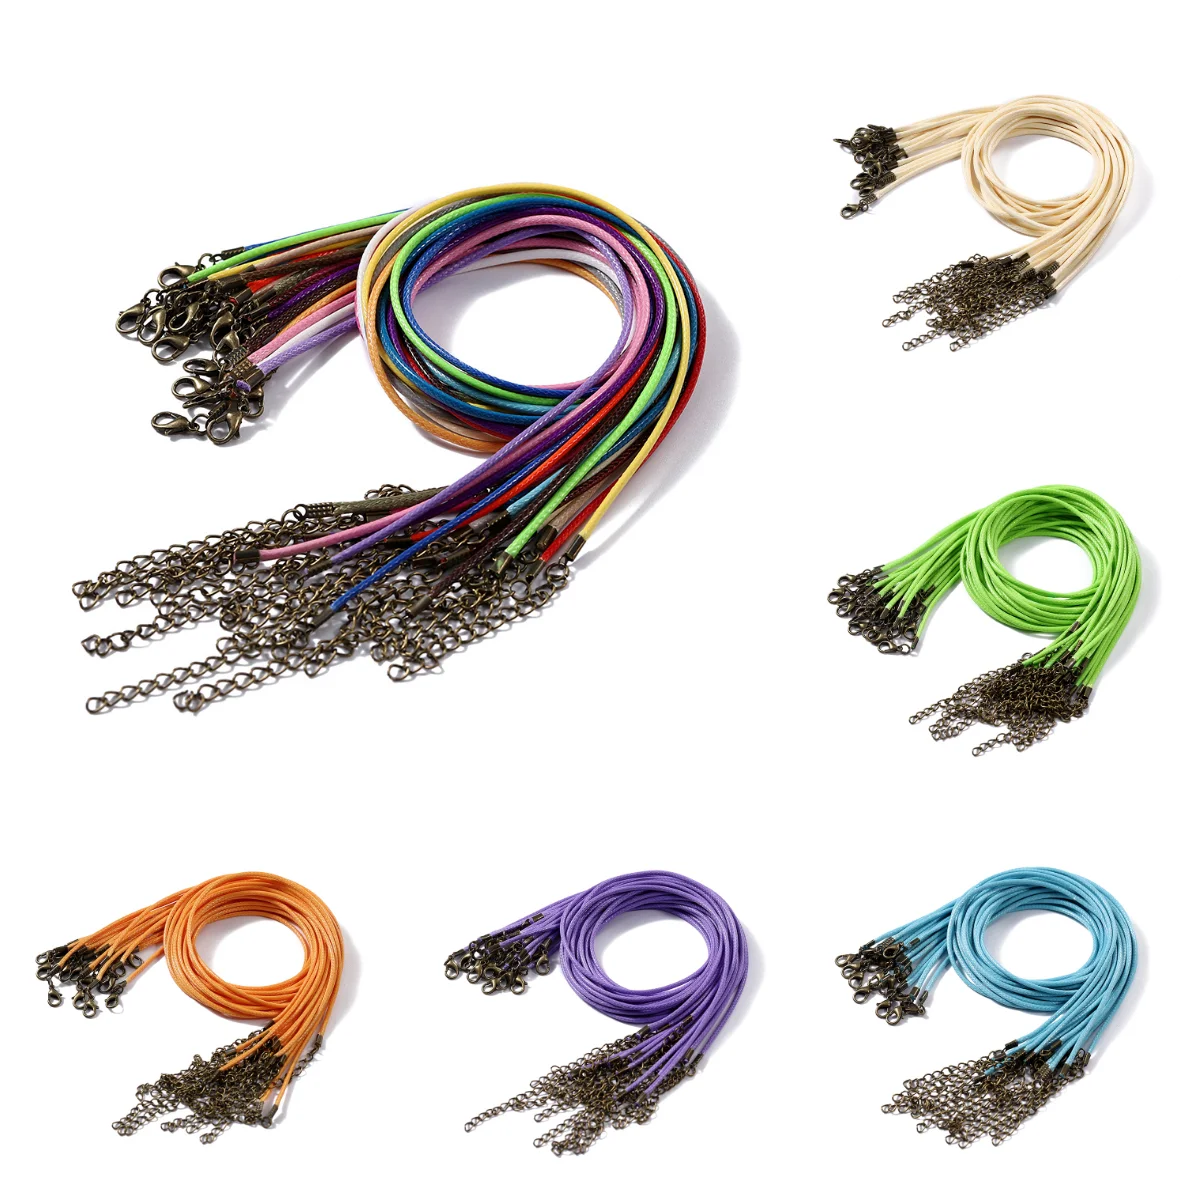 

10Pcs/lot 1.5/2mm Leather Cord Necklace With Lobster Clasp Wax Rope Chain For DIY Necklaces Pendant Wax Cord Jewelry Findings